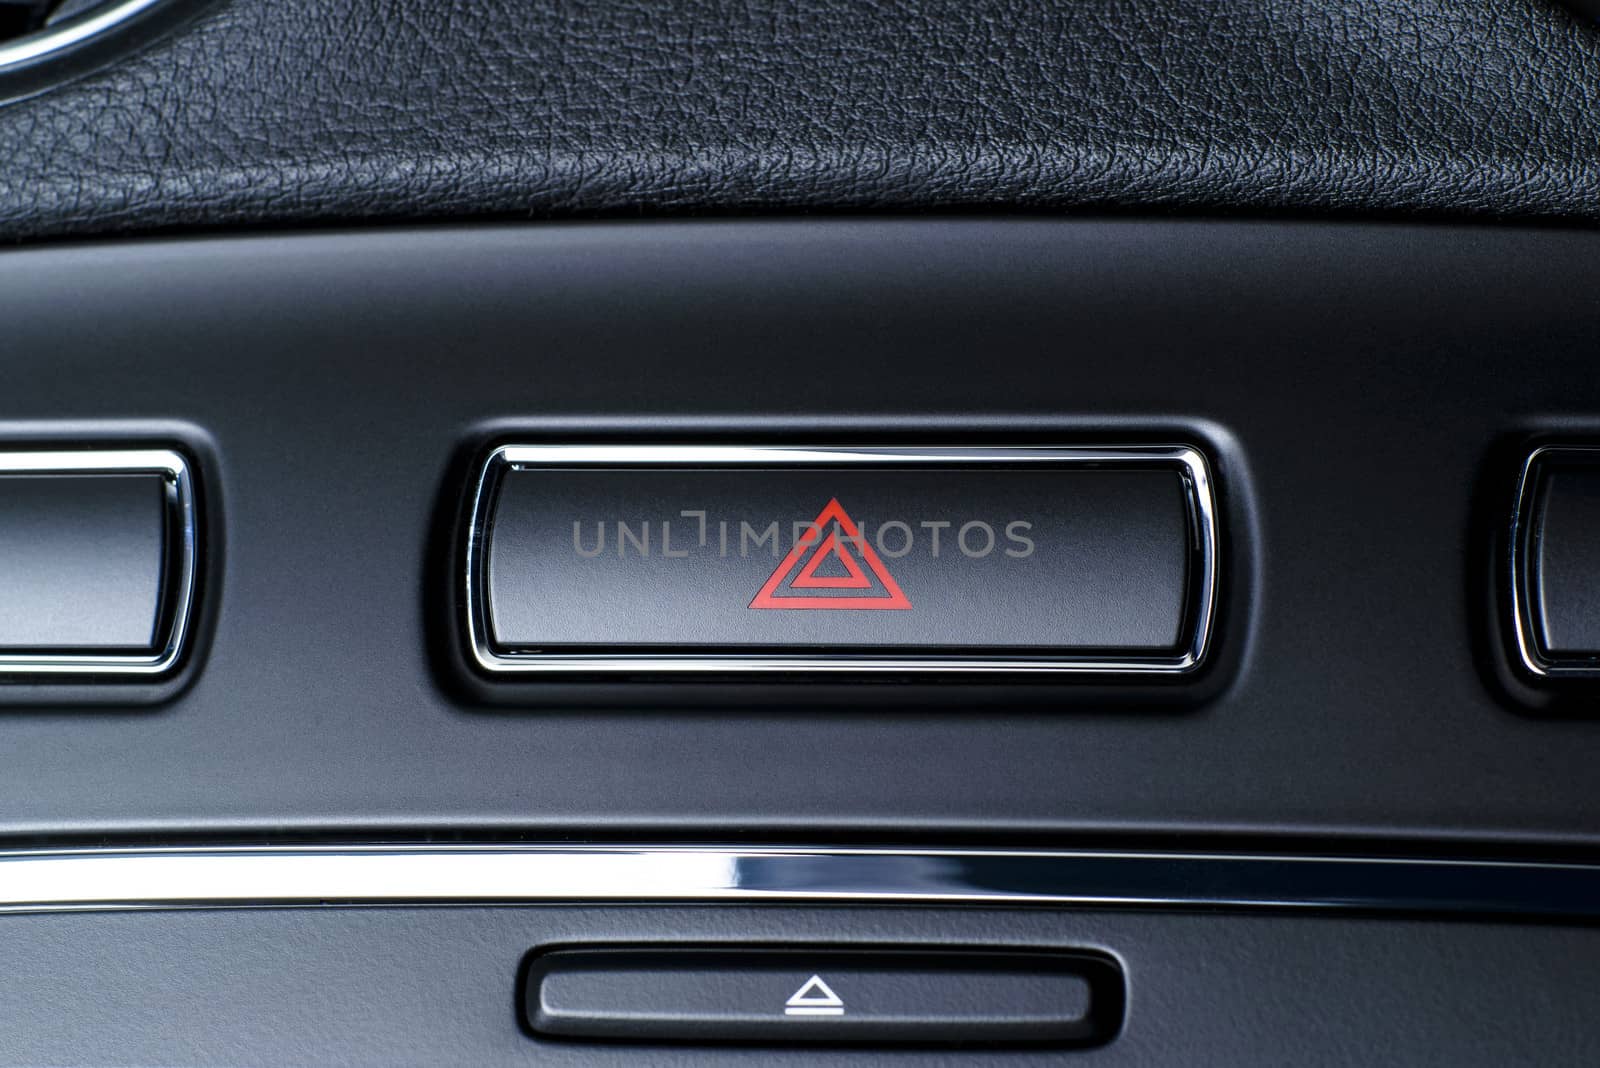 Vehicle, car hazard warning flashers button with visible red triangle. by westernstudio